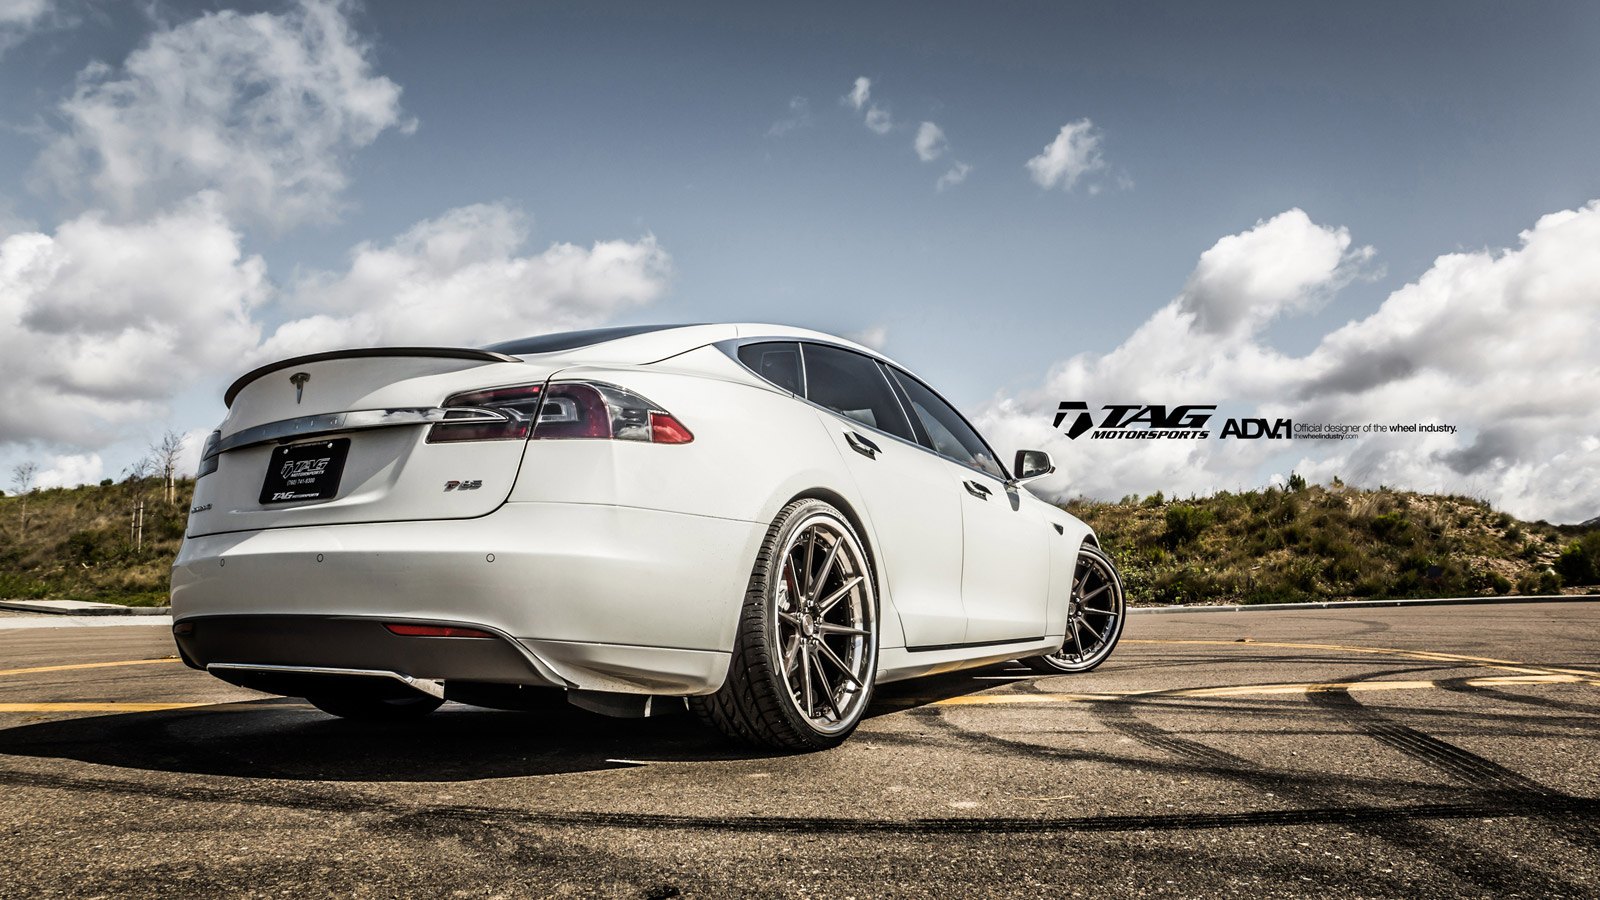 Red Smoke Taillights on White Tesla Model S - Photo by ADV.1